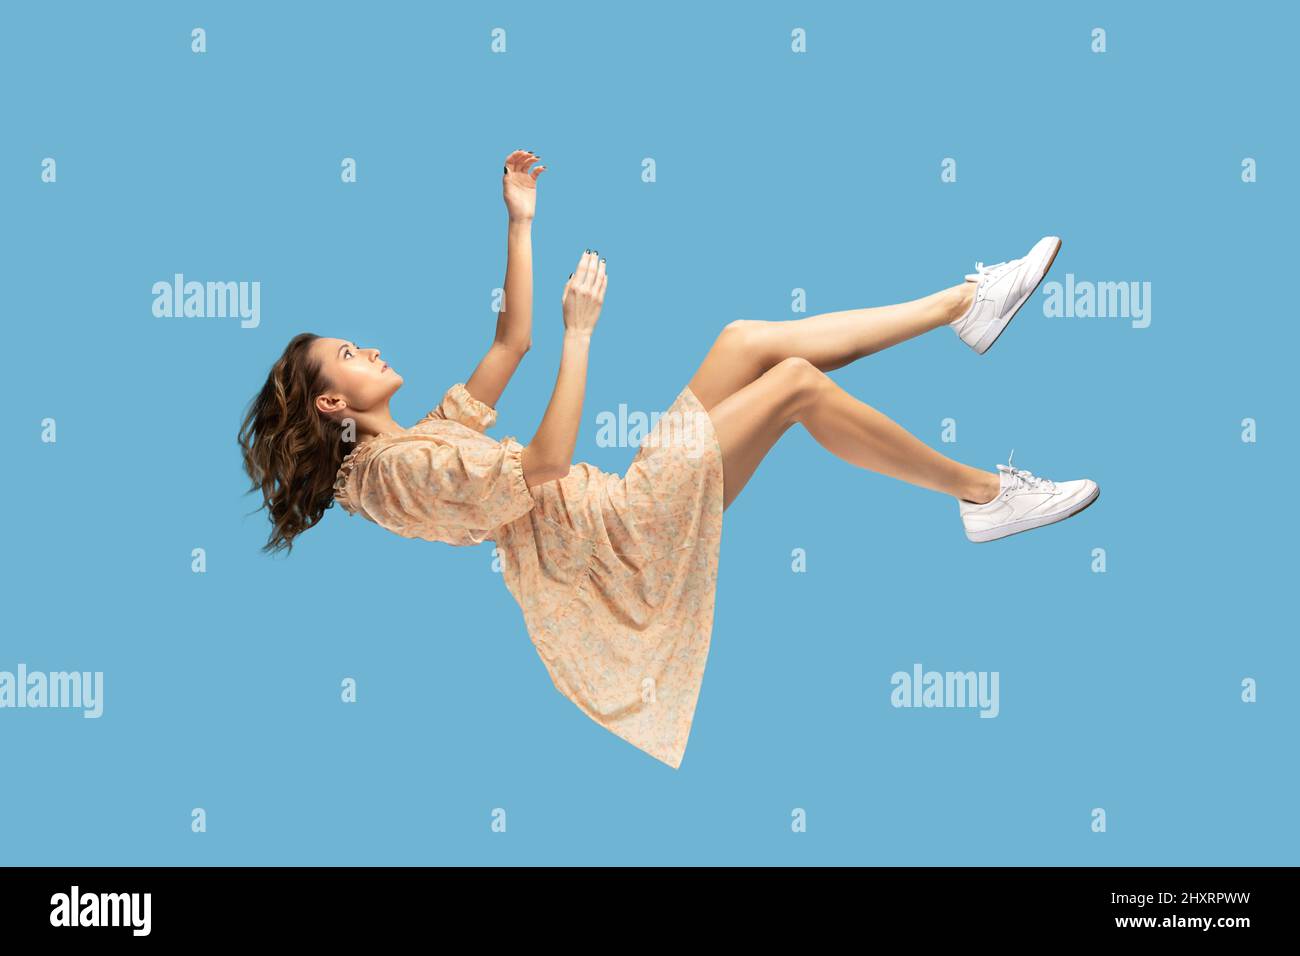 Floating in air. Relaxed girl in yellow dress levitating, looking up while flying mid-air, having comfortable peaceful dream. full length studio shot isolated on blue background, indoor Stock Photo